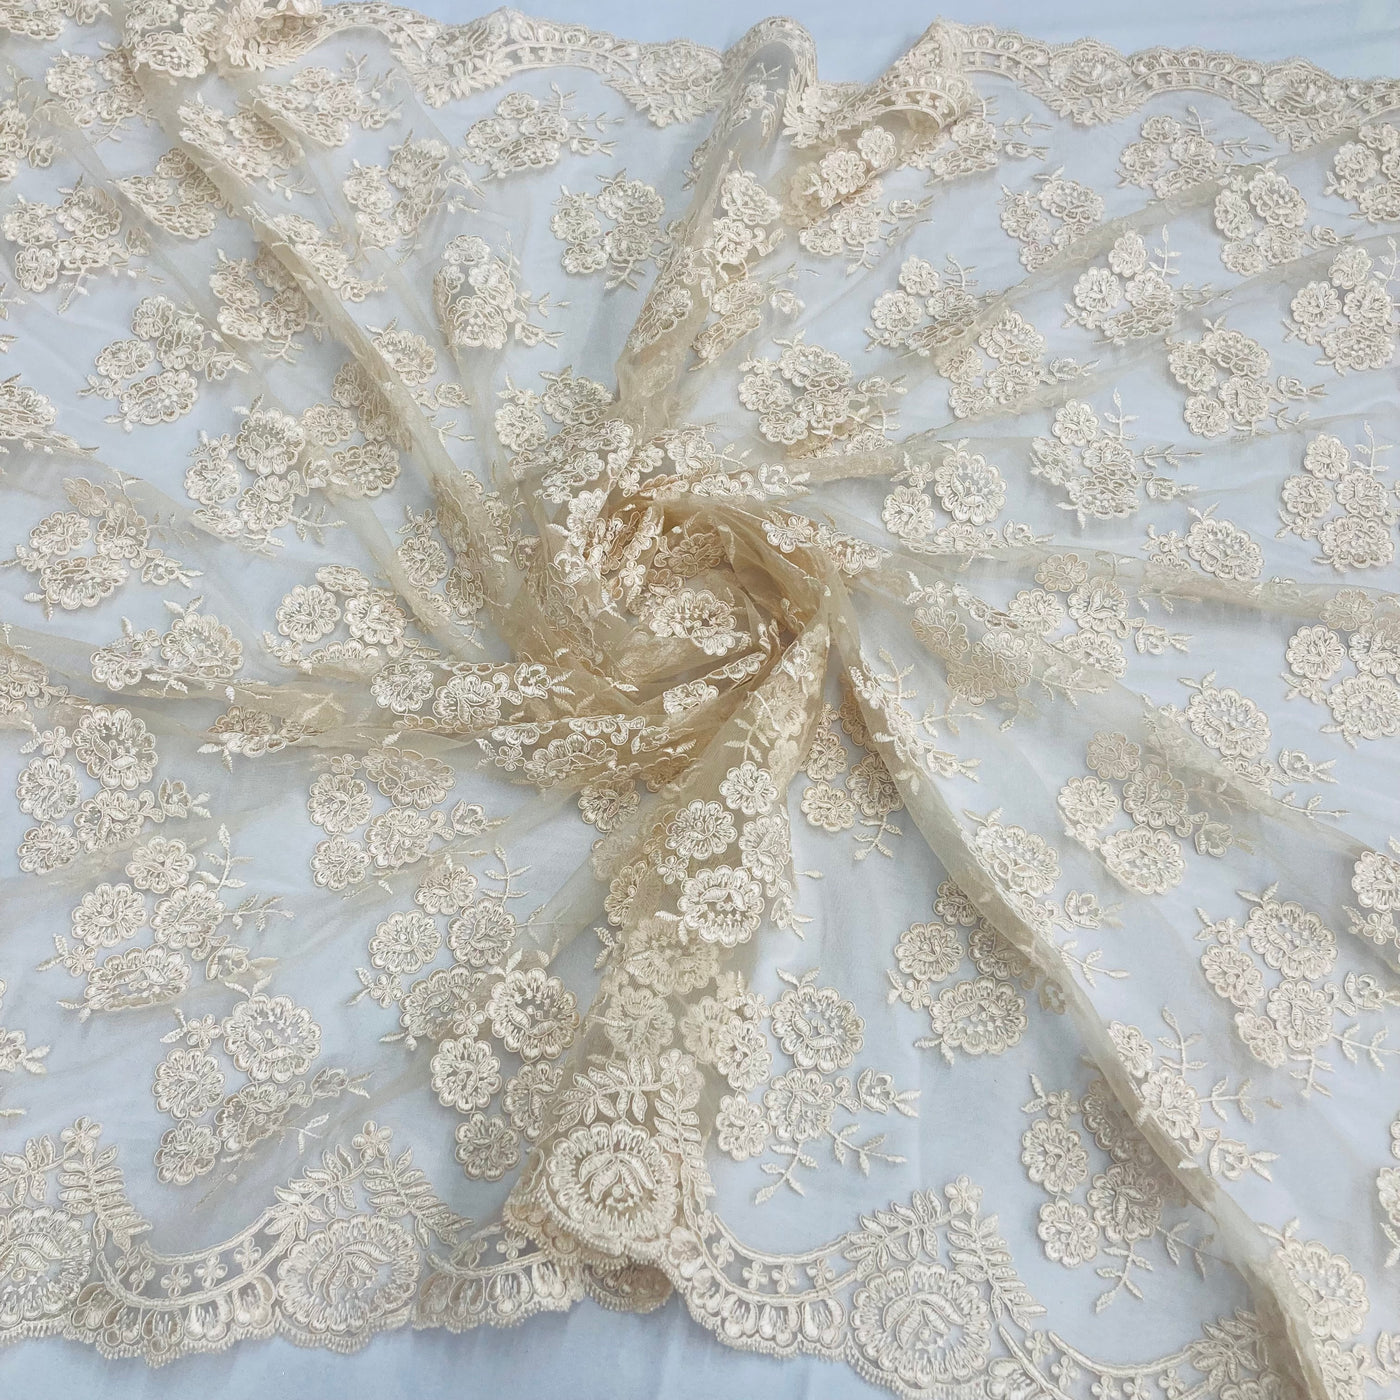 Corded Bridal Lace Fabric Embroidered on 100% Polyester Net Mesh. Lace USA